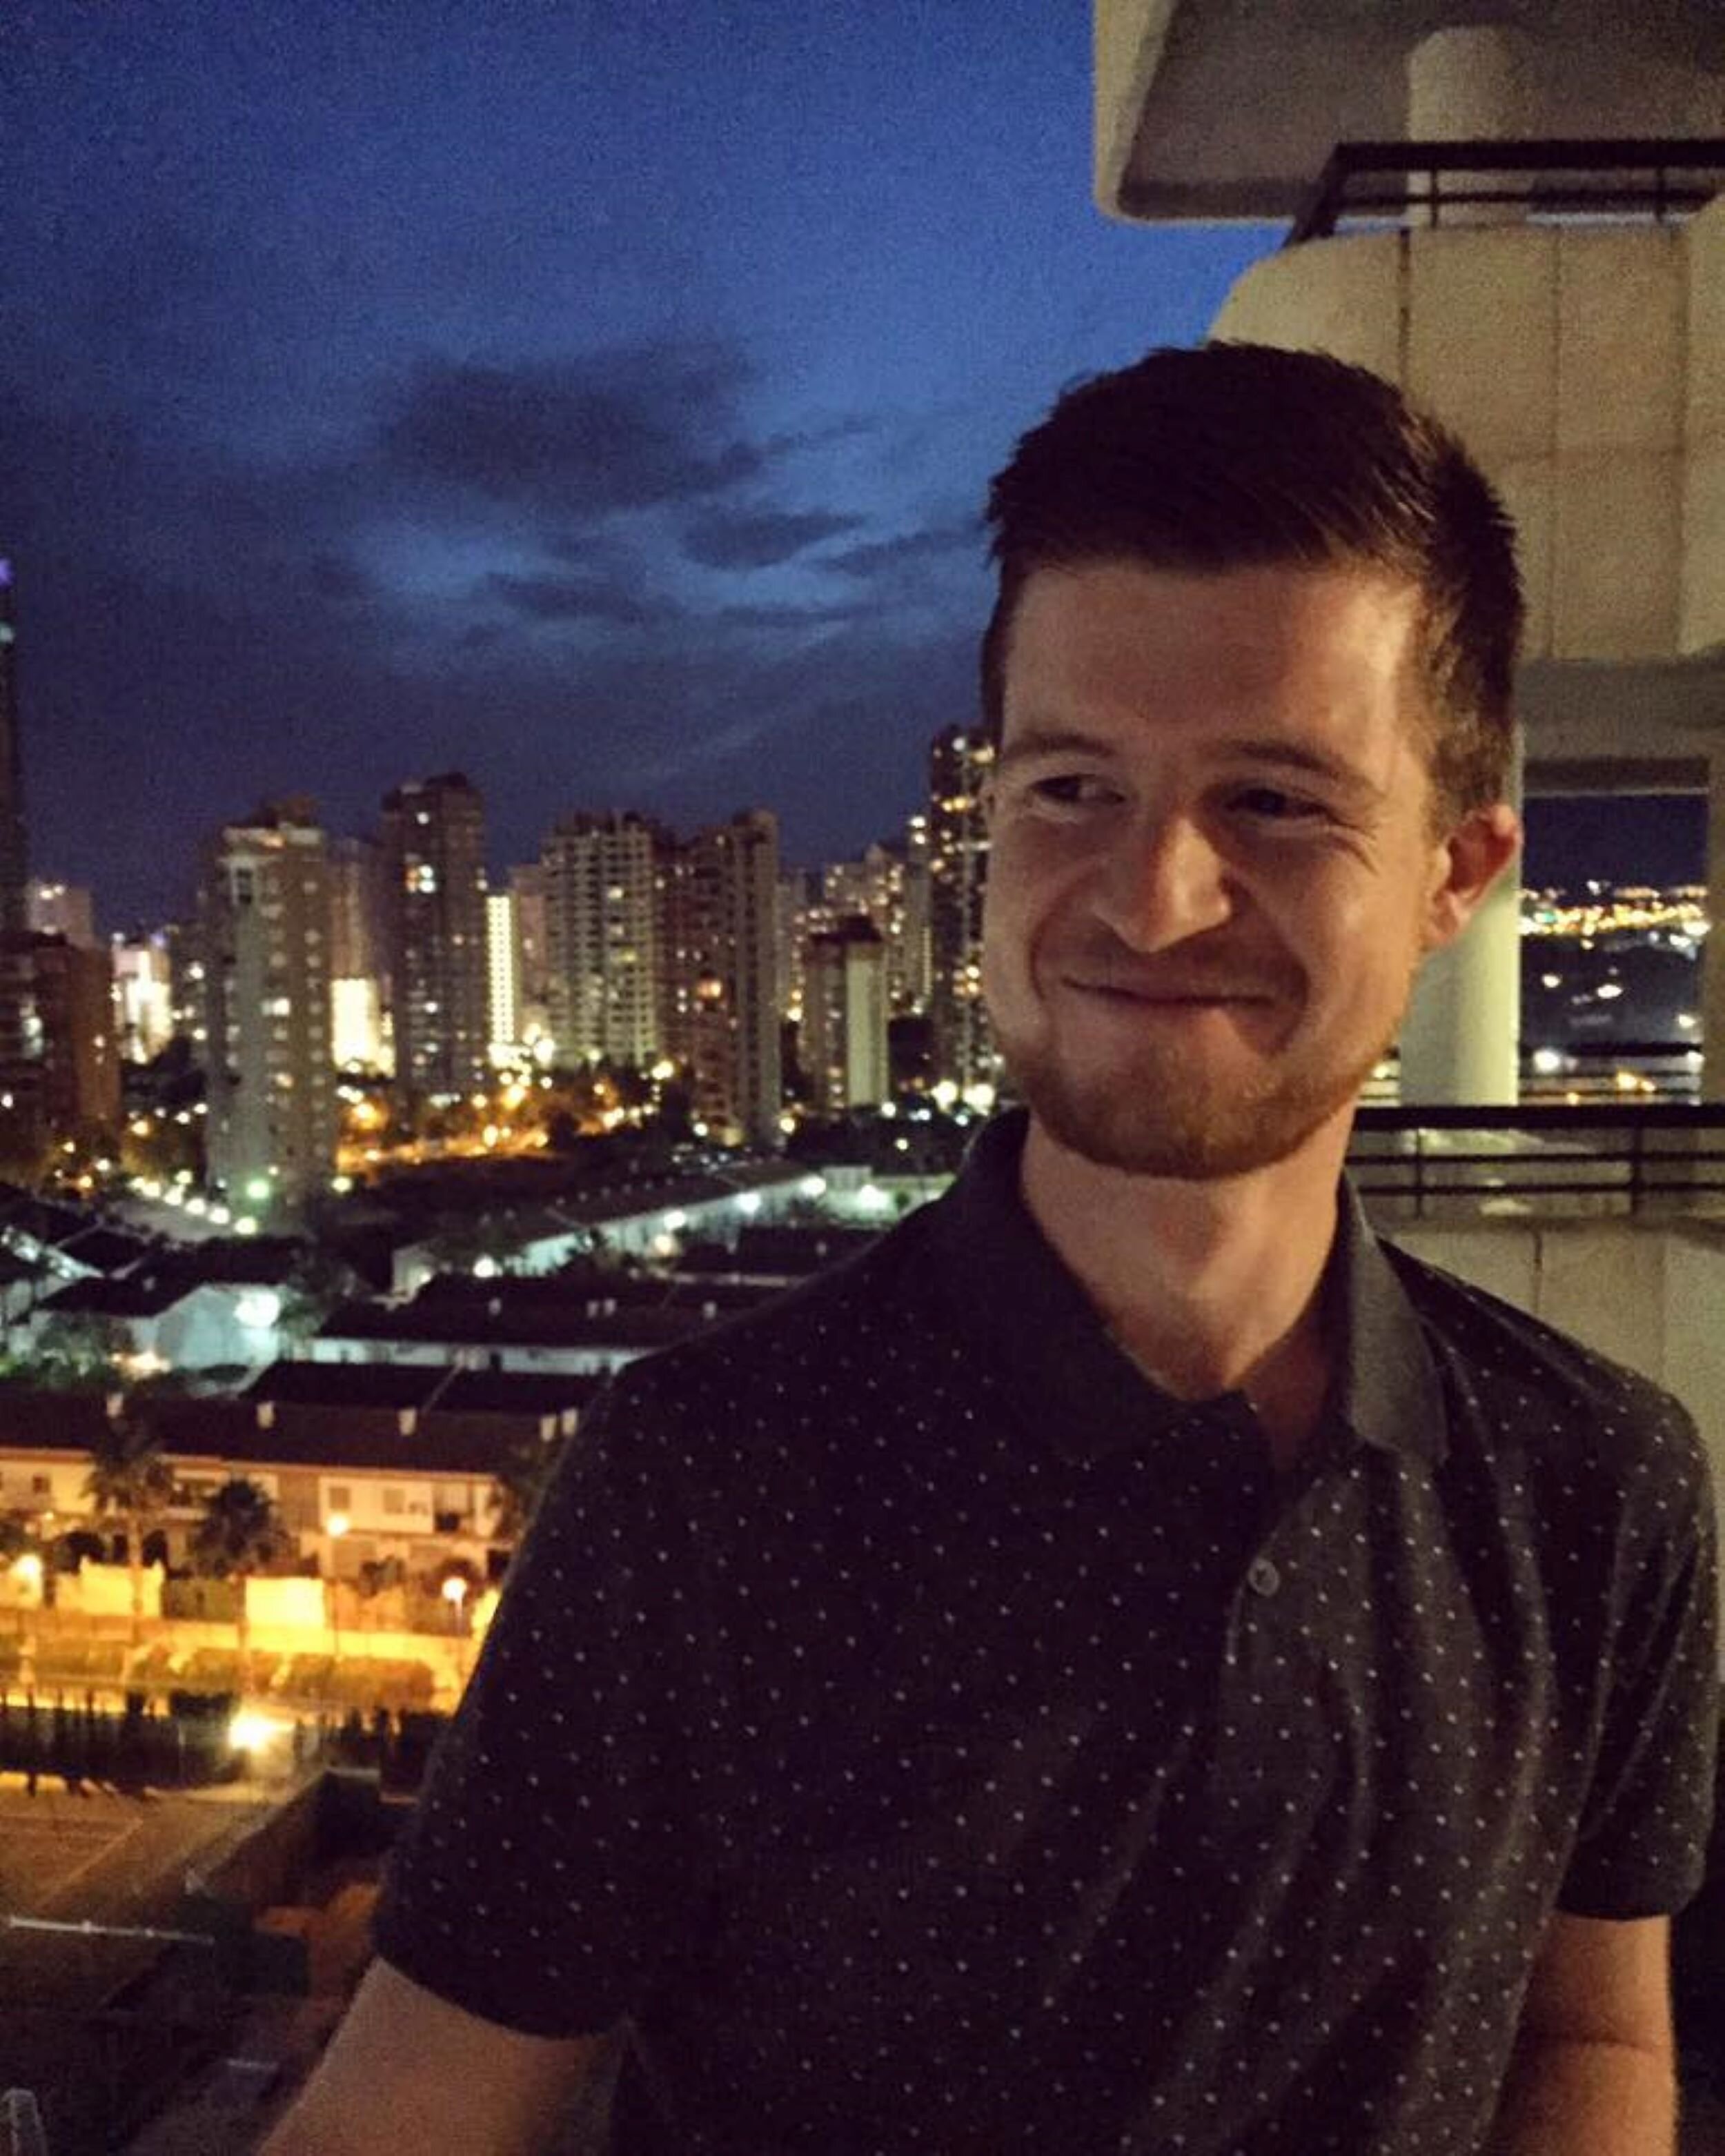 Alex enjoying the sites in Spain 2016. He's pictured wearing a short sleeve black button up shirt, with the metropolitan night skyline lit up behind him. Photo: Alex Waite